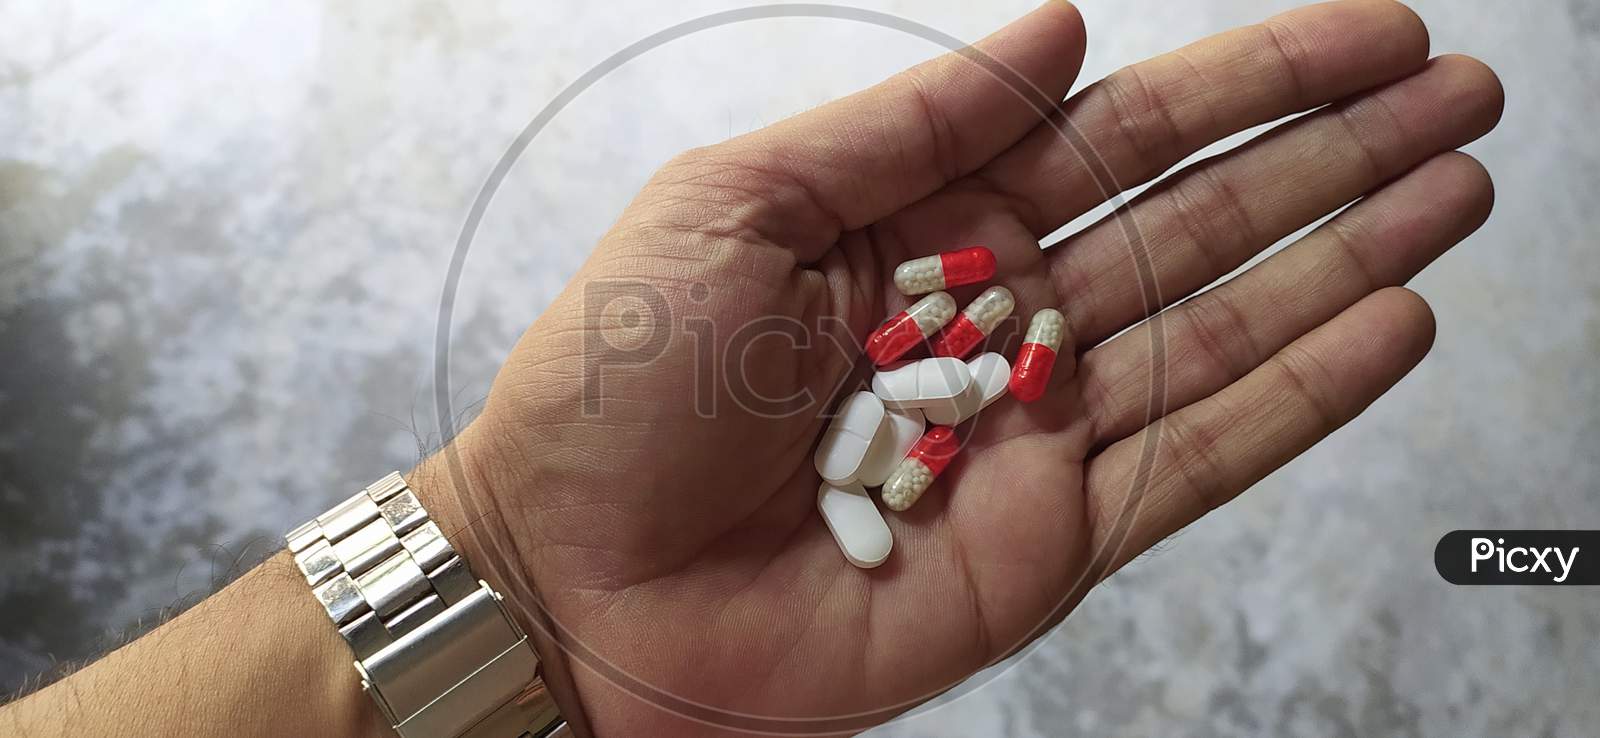 Tablets and capsules in hand close up shot